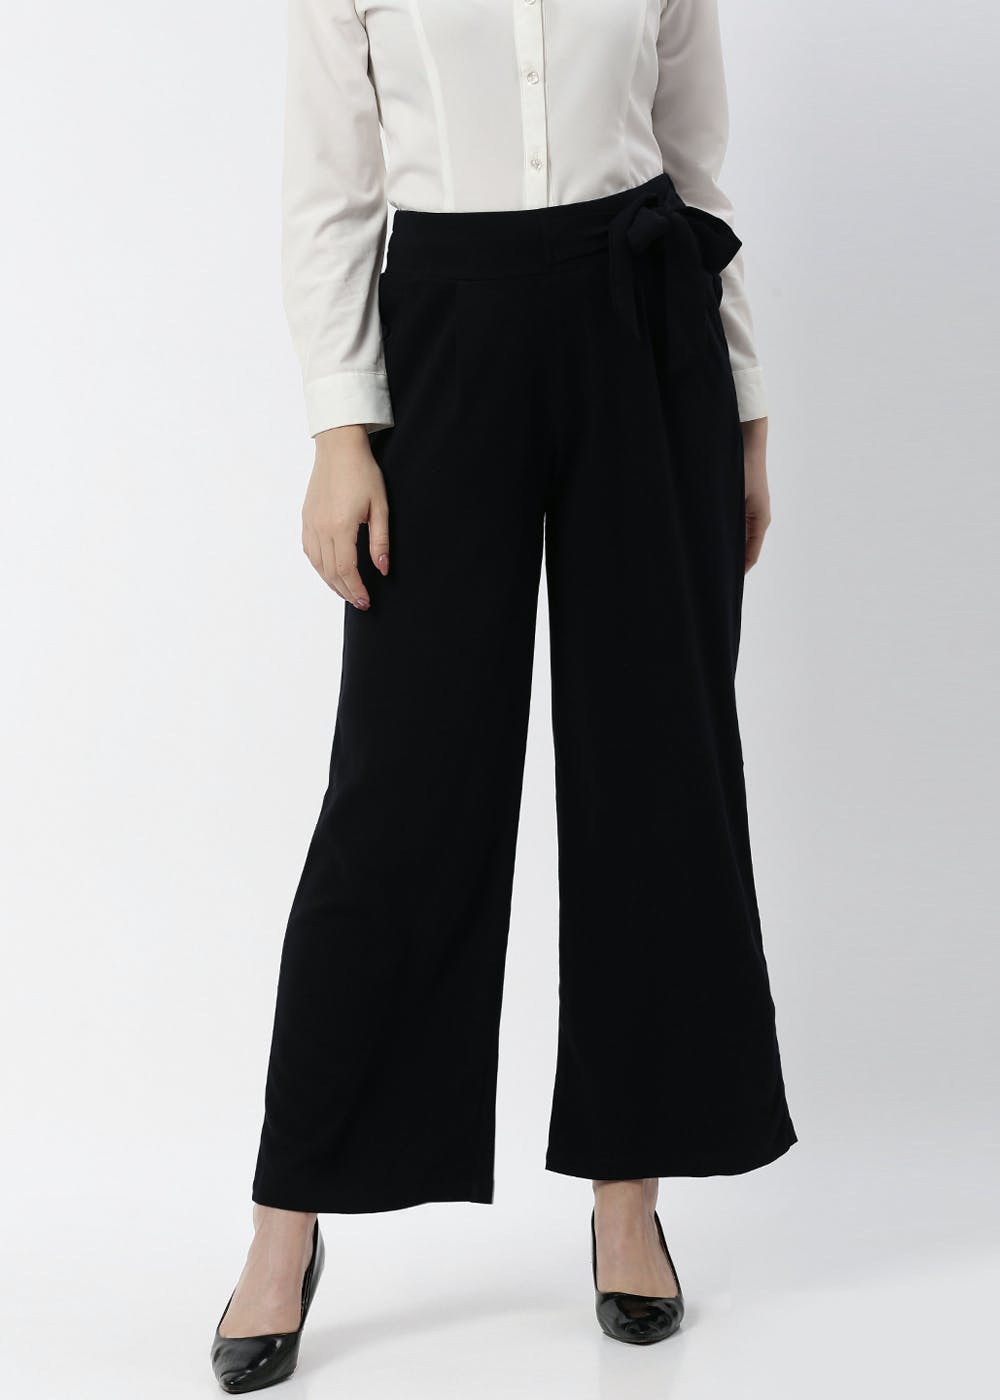 Buy Grey Trousers  Pants for Women by Melange by Lifestyle Online   Ajiocom